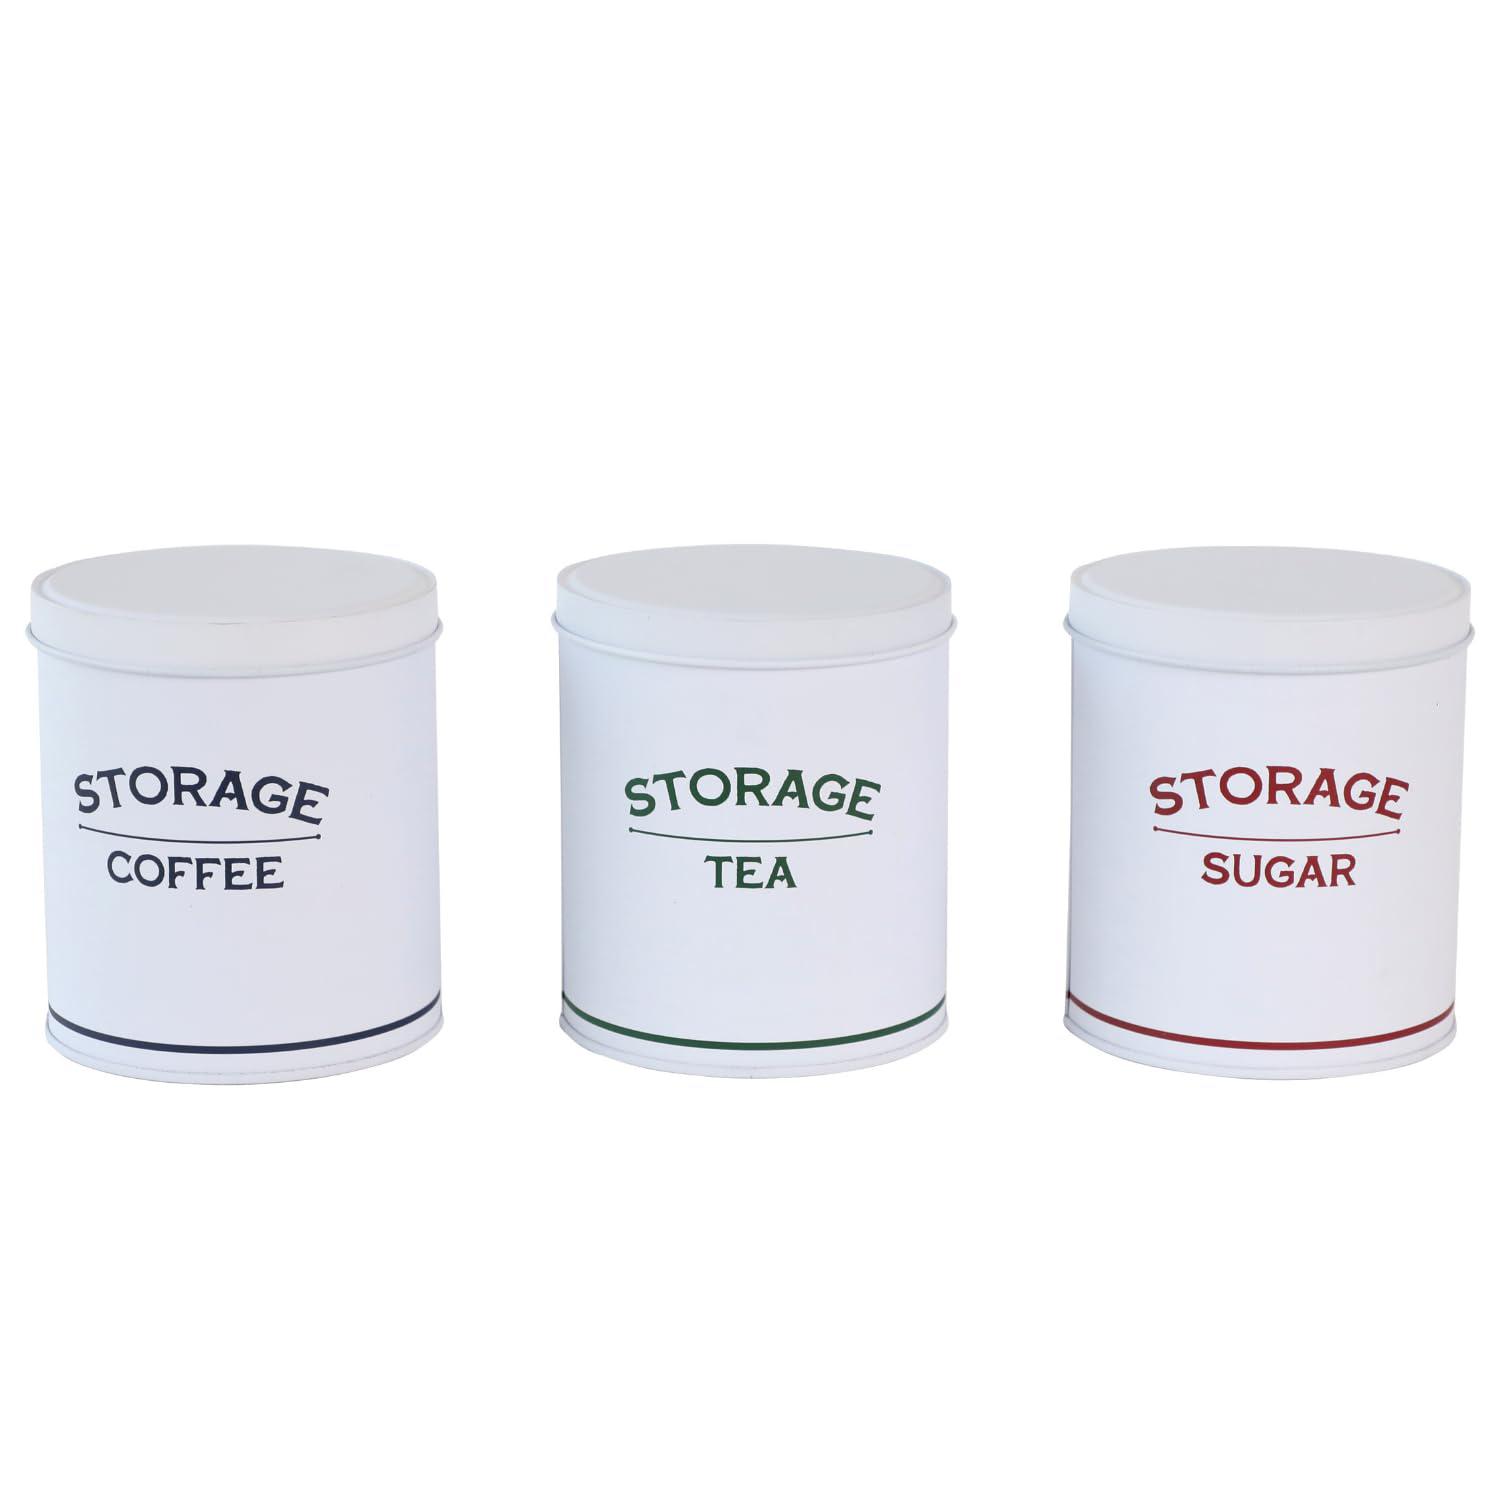 sarkap canisters sets for the kitchen - 3 piece kitchen canisters for countertop, coffee canister tea flour and sugar contain